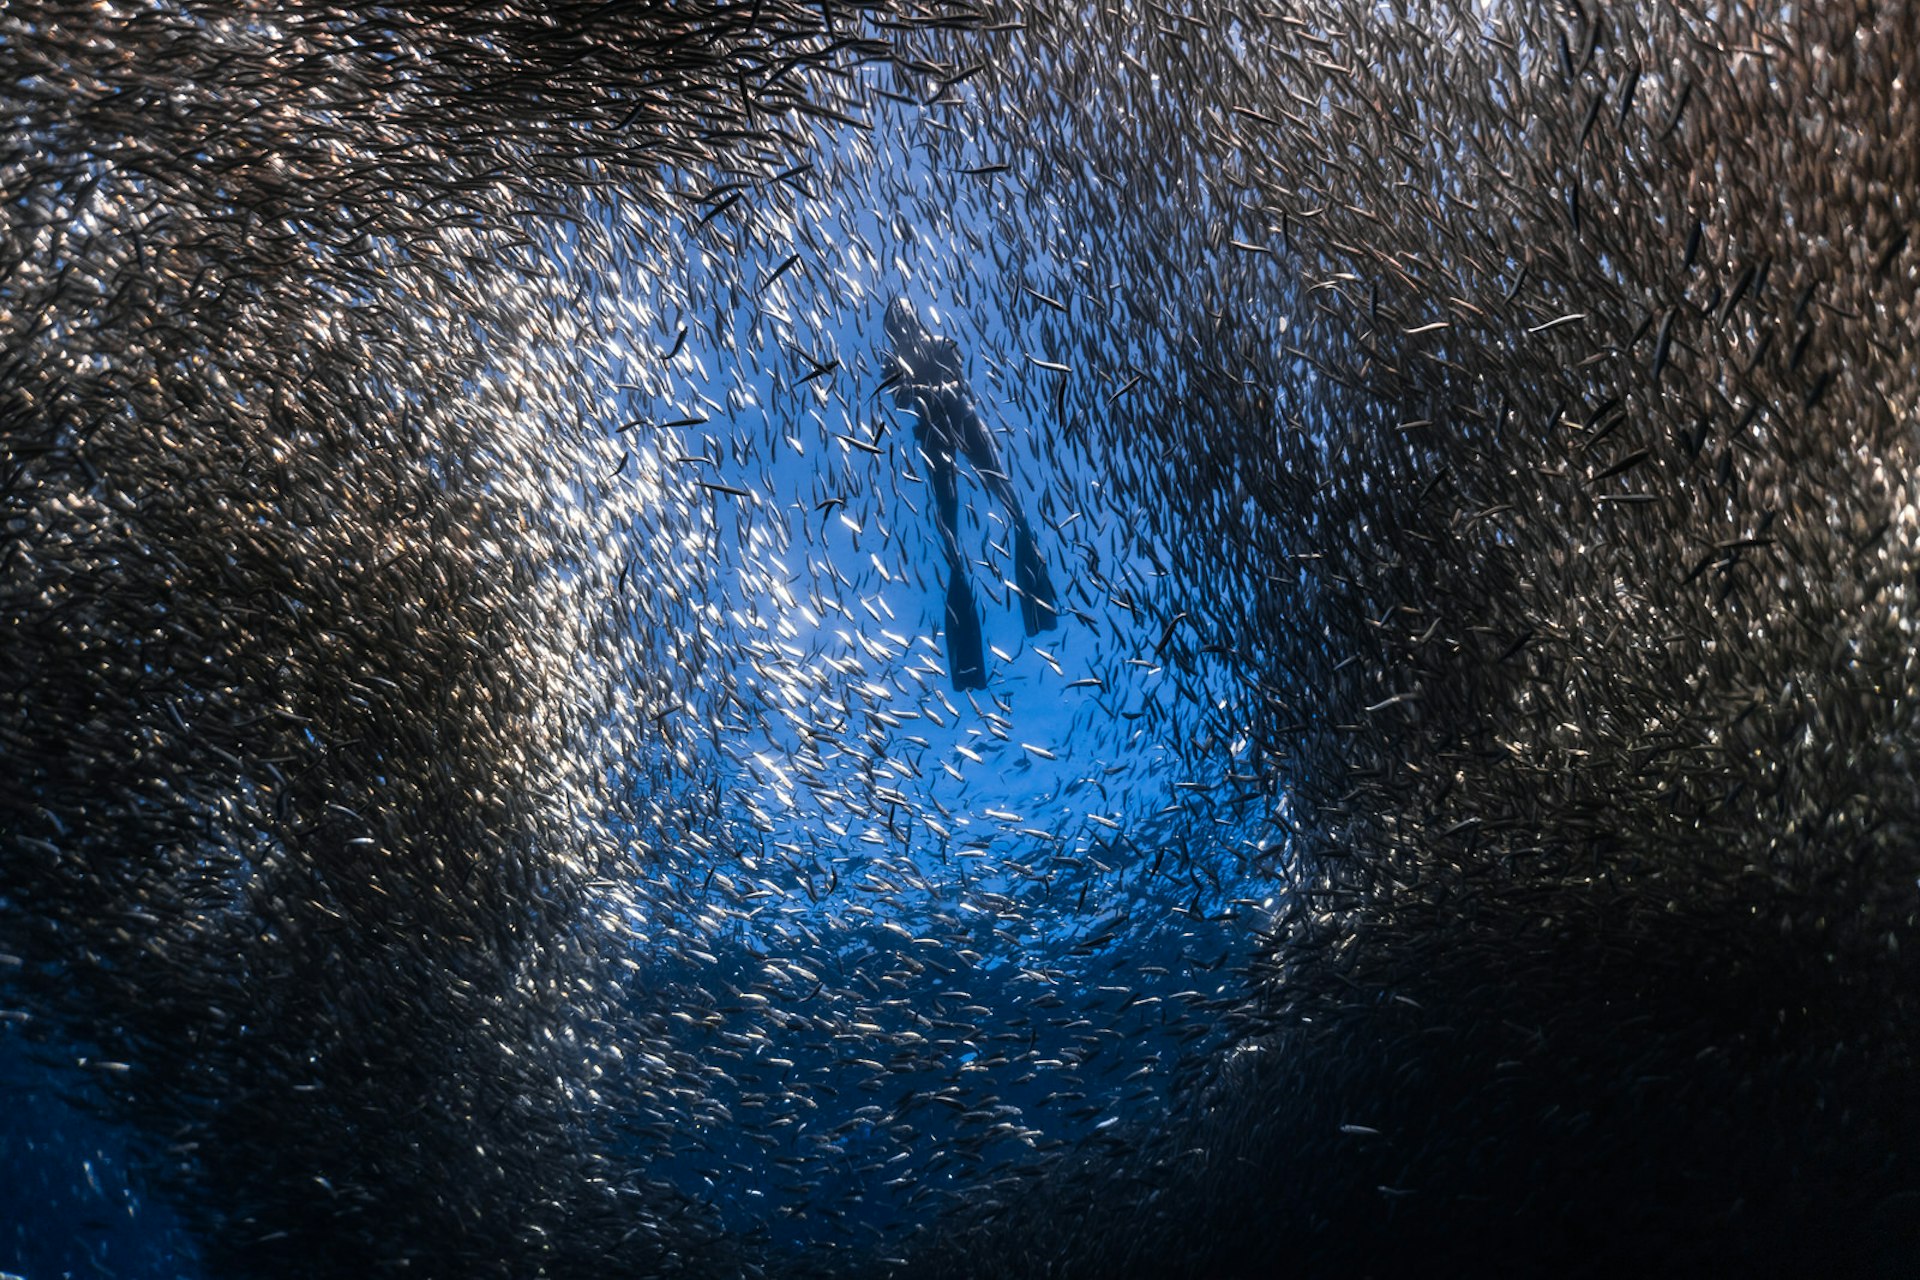 Sardine run diver wearing a wetsuit and flippers swims along the surface of the water. The photo is taken from below, showing a huge school of silver sardines circling around the diver